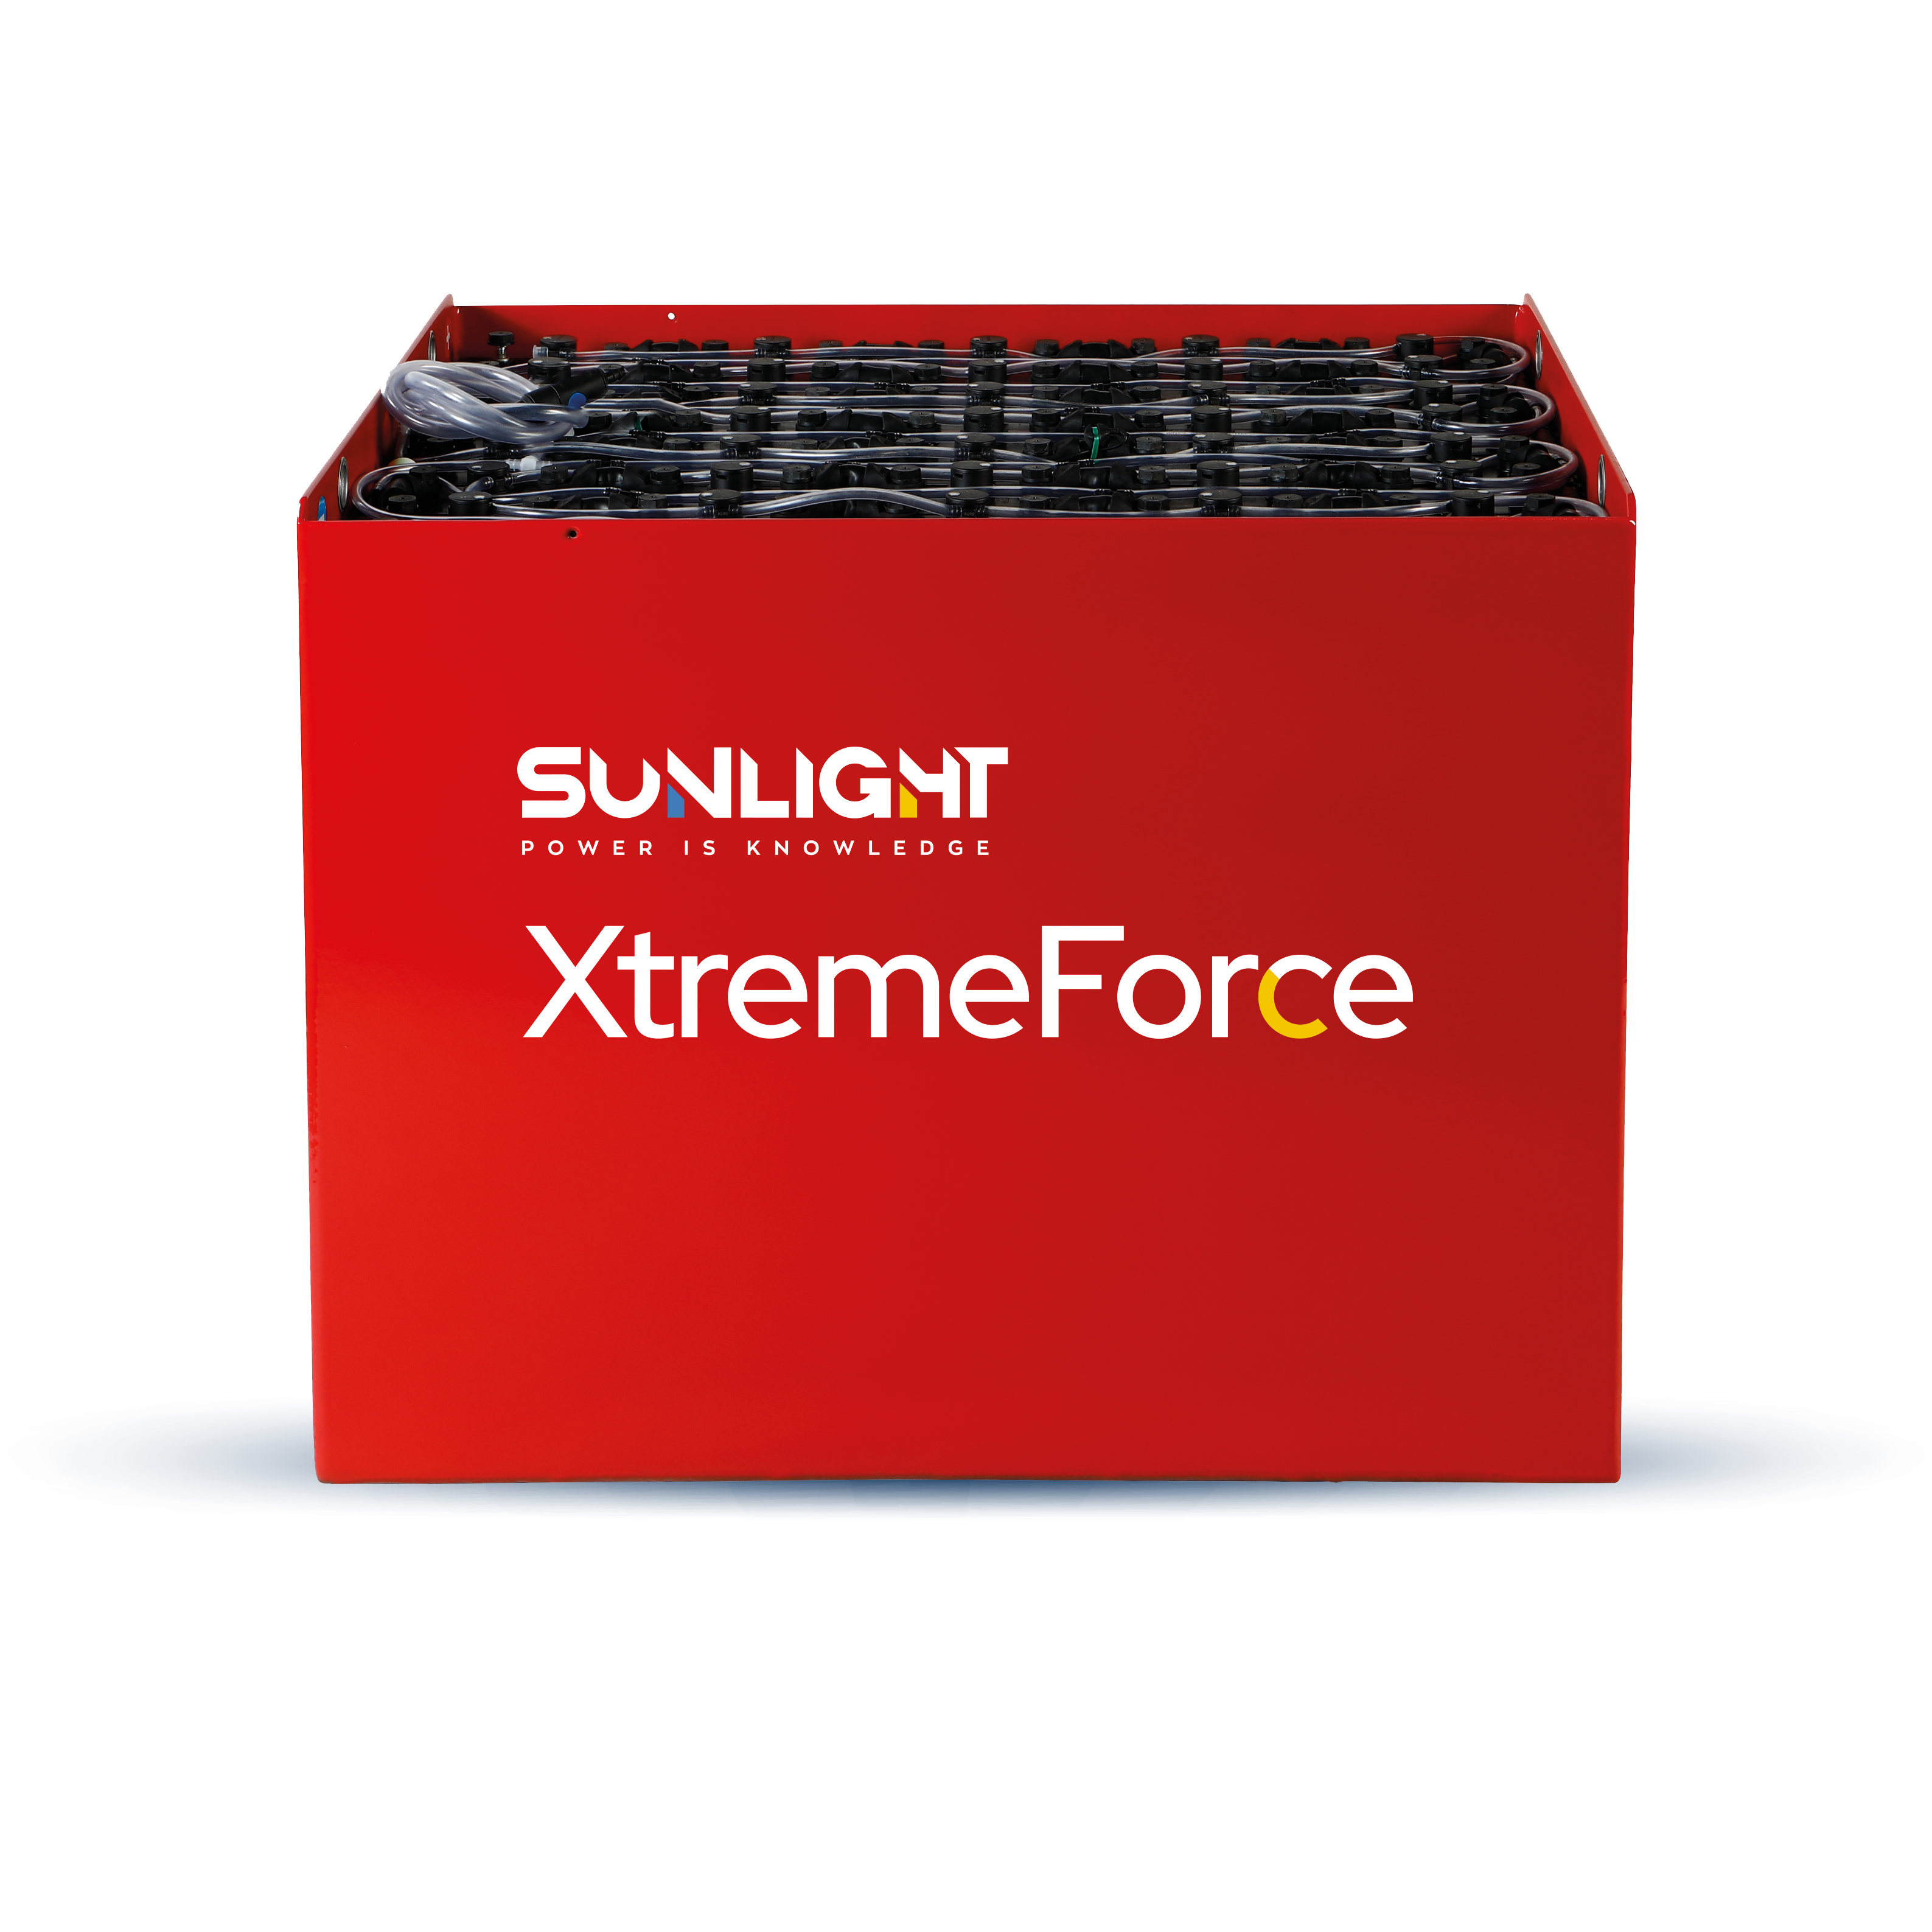 Sunlight XtremeForce battery - ideal choice for operations under extreme conditions.